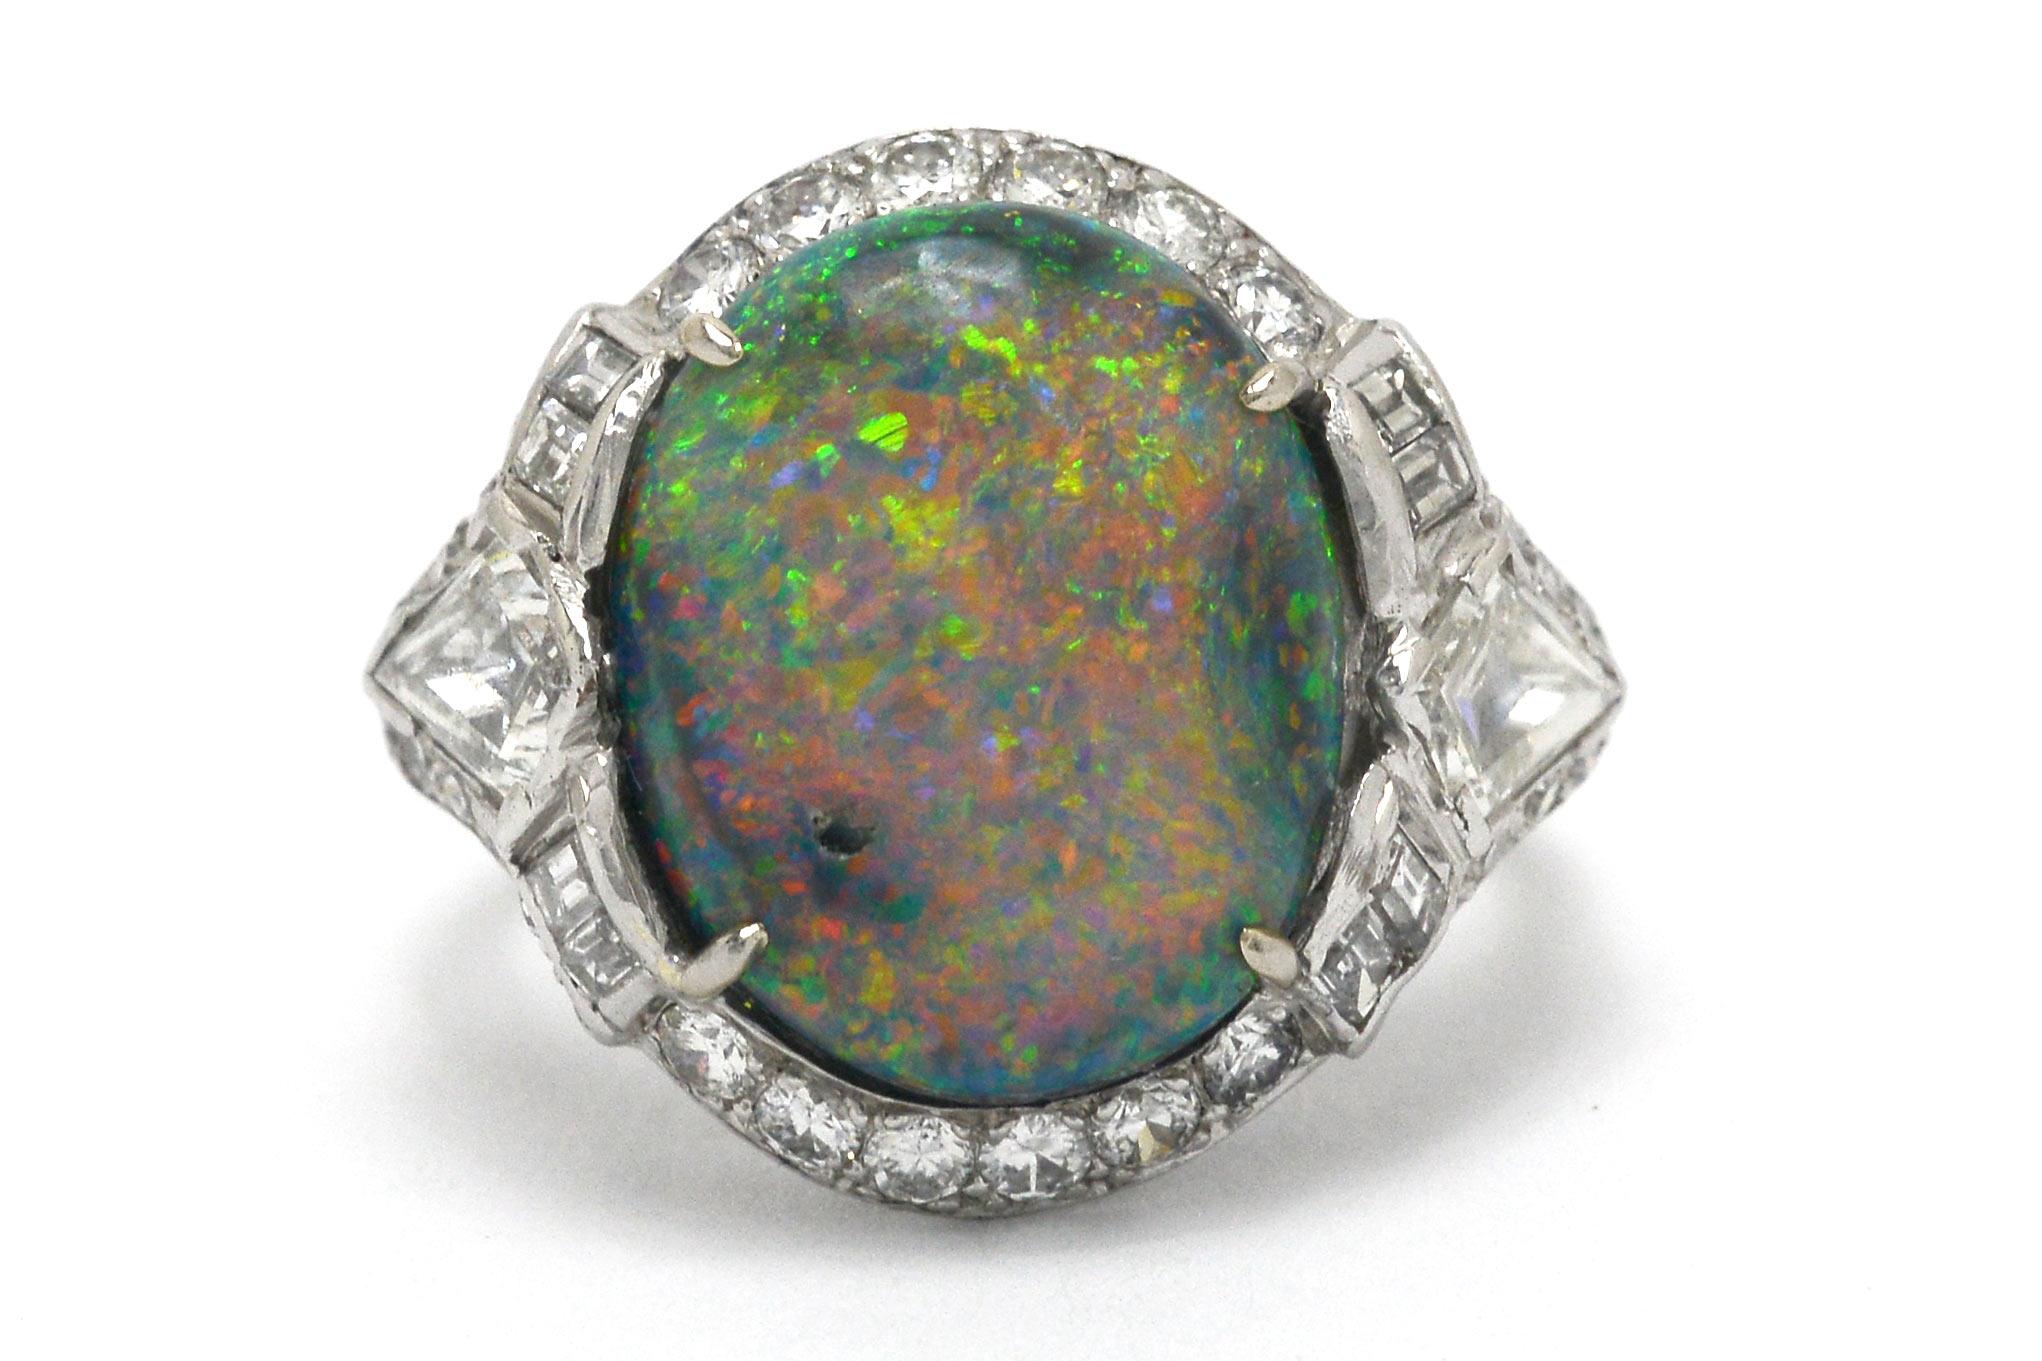 Art Deco 6.76 Carat Black Opal Cocktail Ring GIA Certified In Good Condition For Sale In Santa Barbara, CA